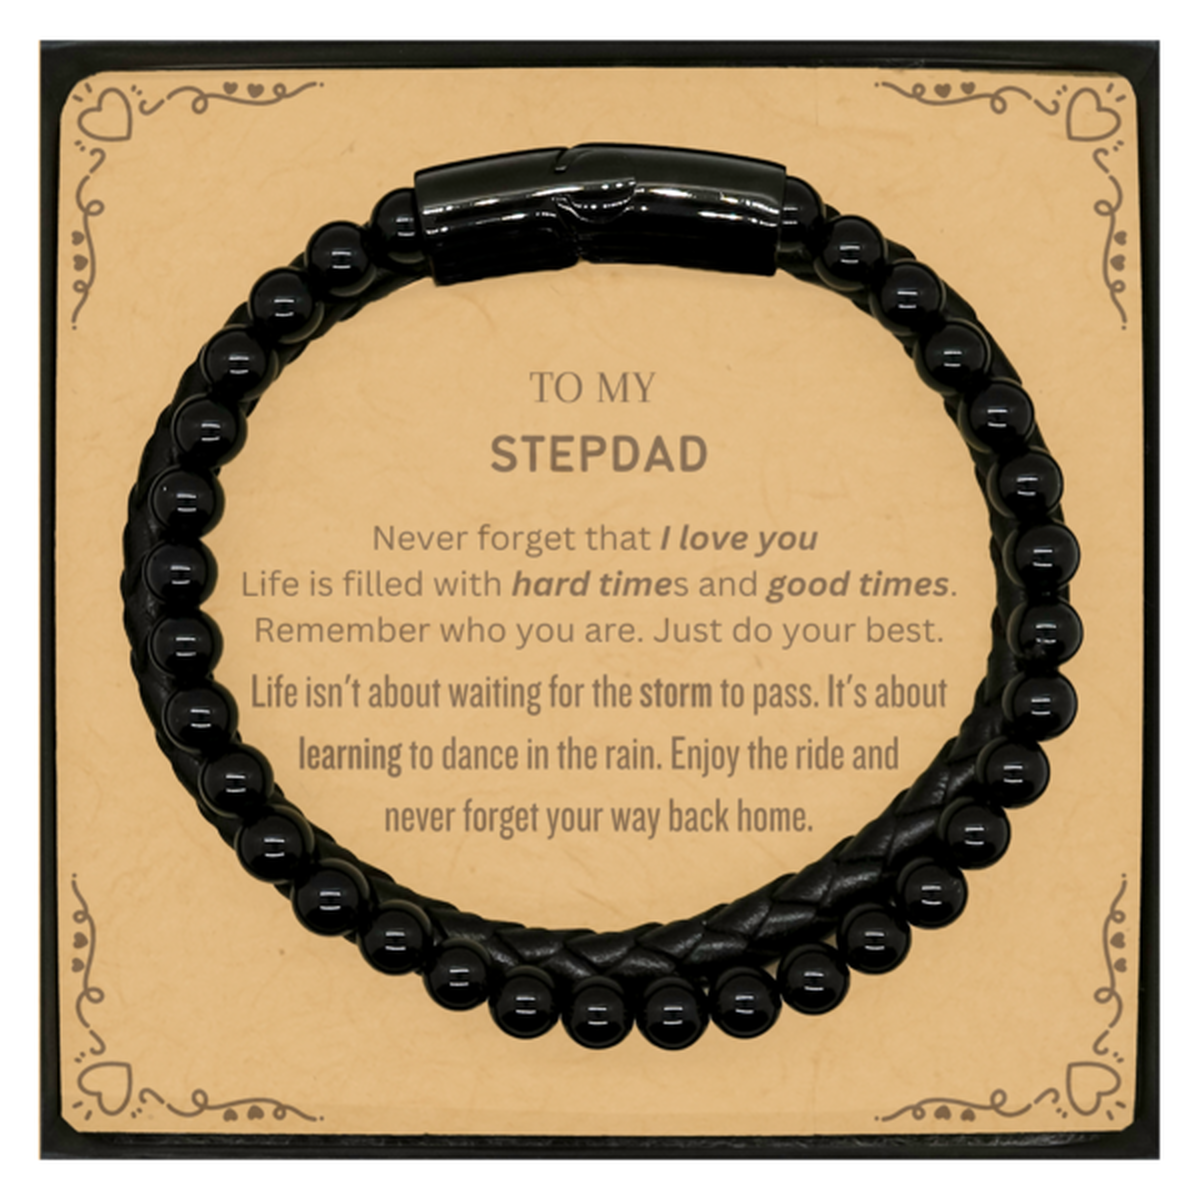 Christmas Stepdad Stone Leather Bracelets Gifts, To My Stepdad Birthday Thank You Gifts For Stepdad, Graduation Unique Gifts For Stepdad To My Stepdad Never forget that I love you life is filled with hard times and good times. Remember who you are. Just d